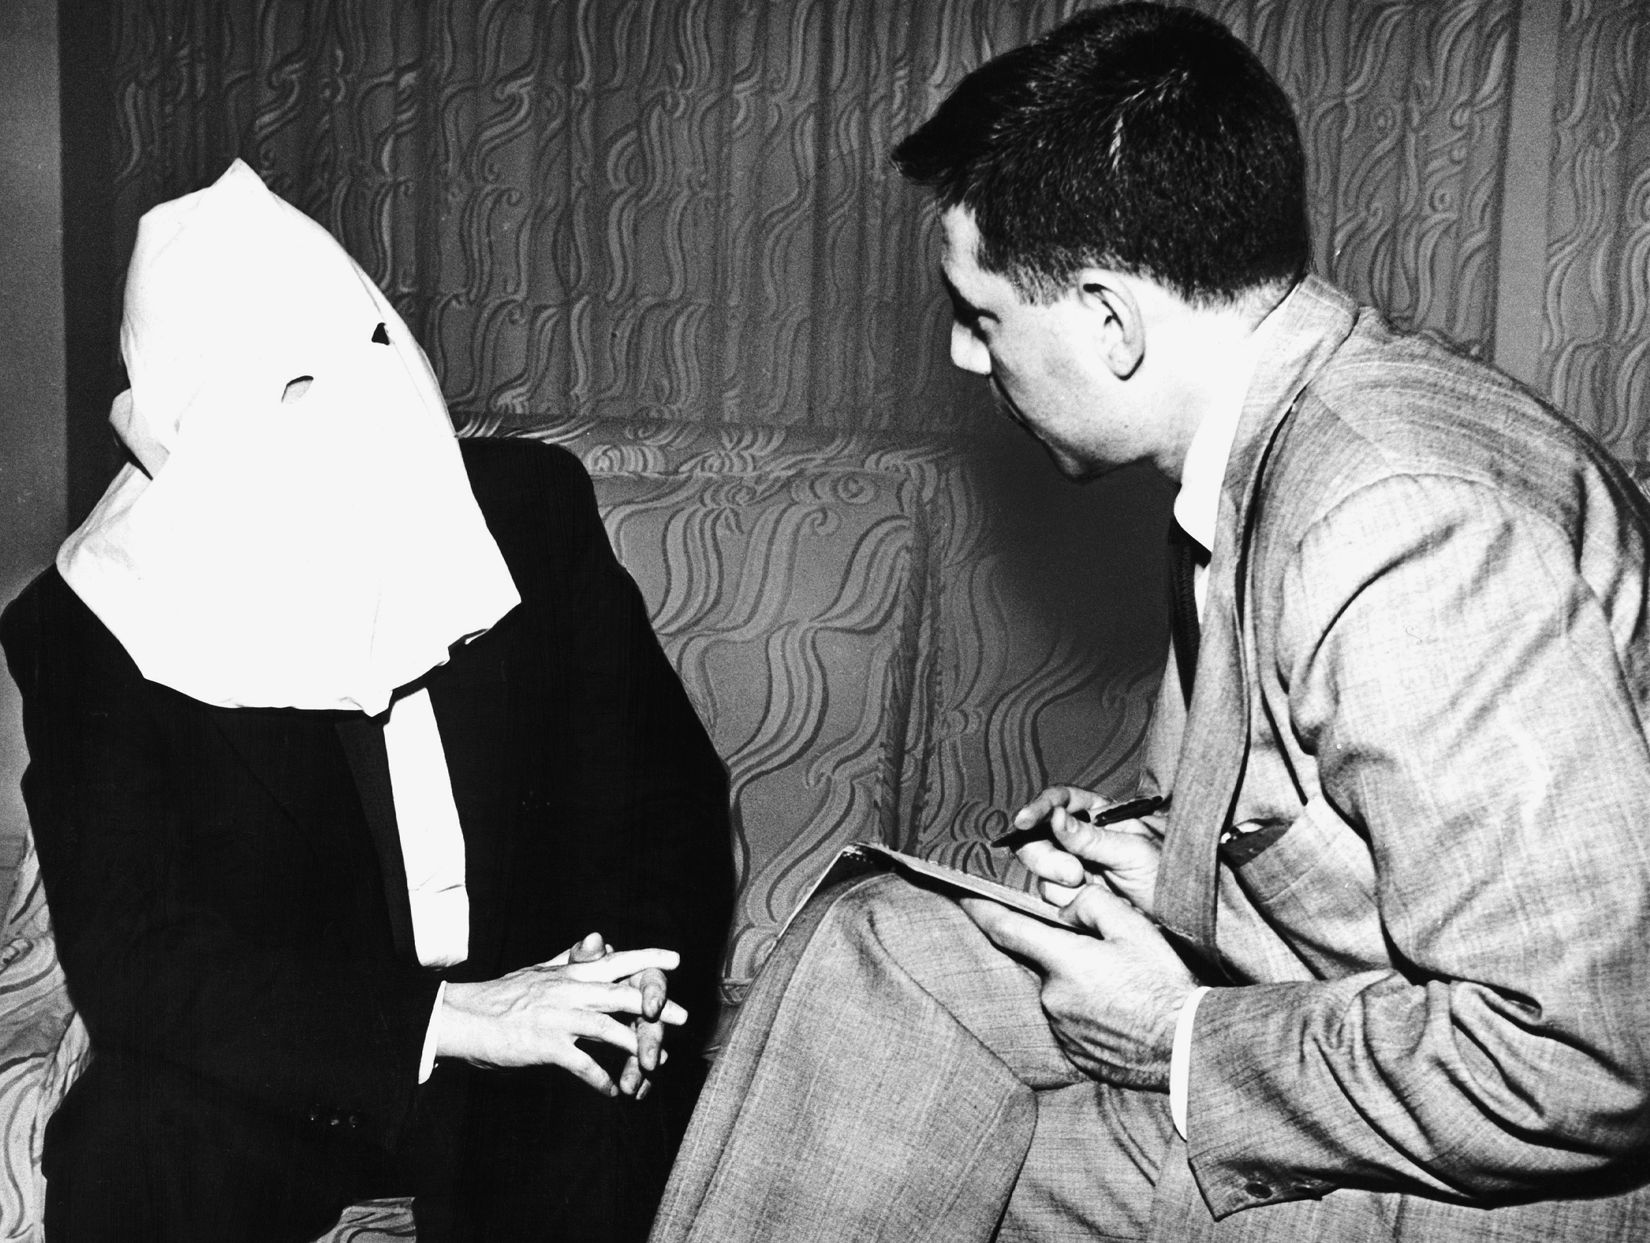 Masked to protect his identity, Igor Gouzenko, a member of the Soviet embassy staff in Ottawa, speaks to American journalist Saul Patt following his defection. Gouzenko later became a Canadian citizen.